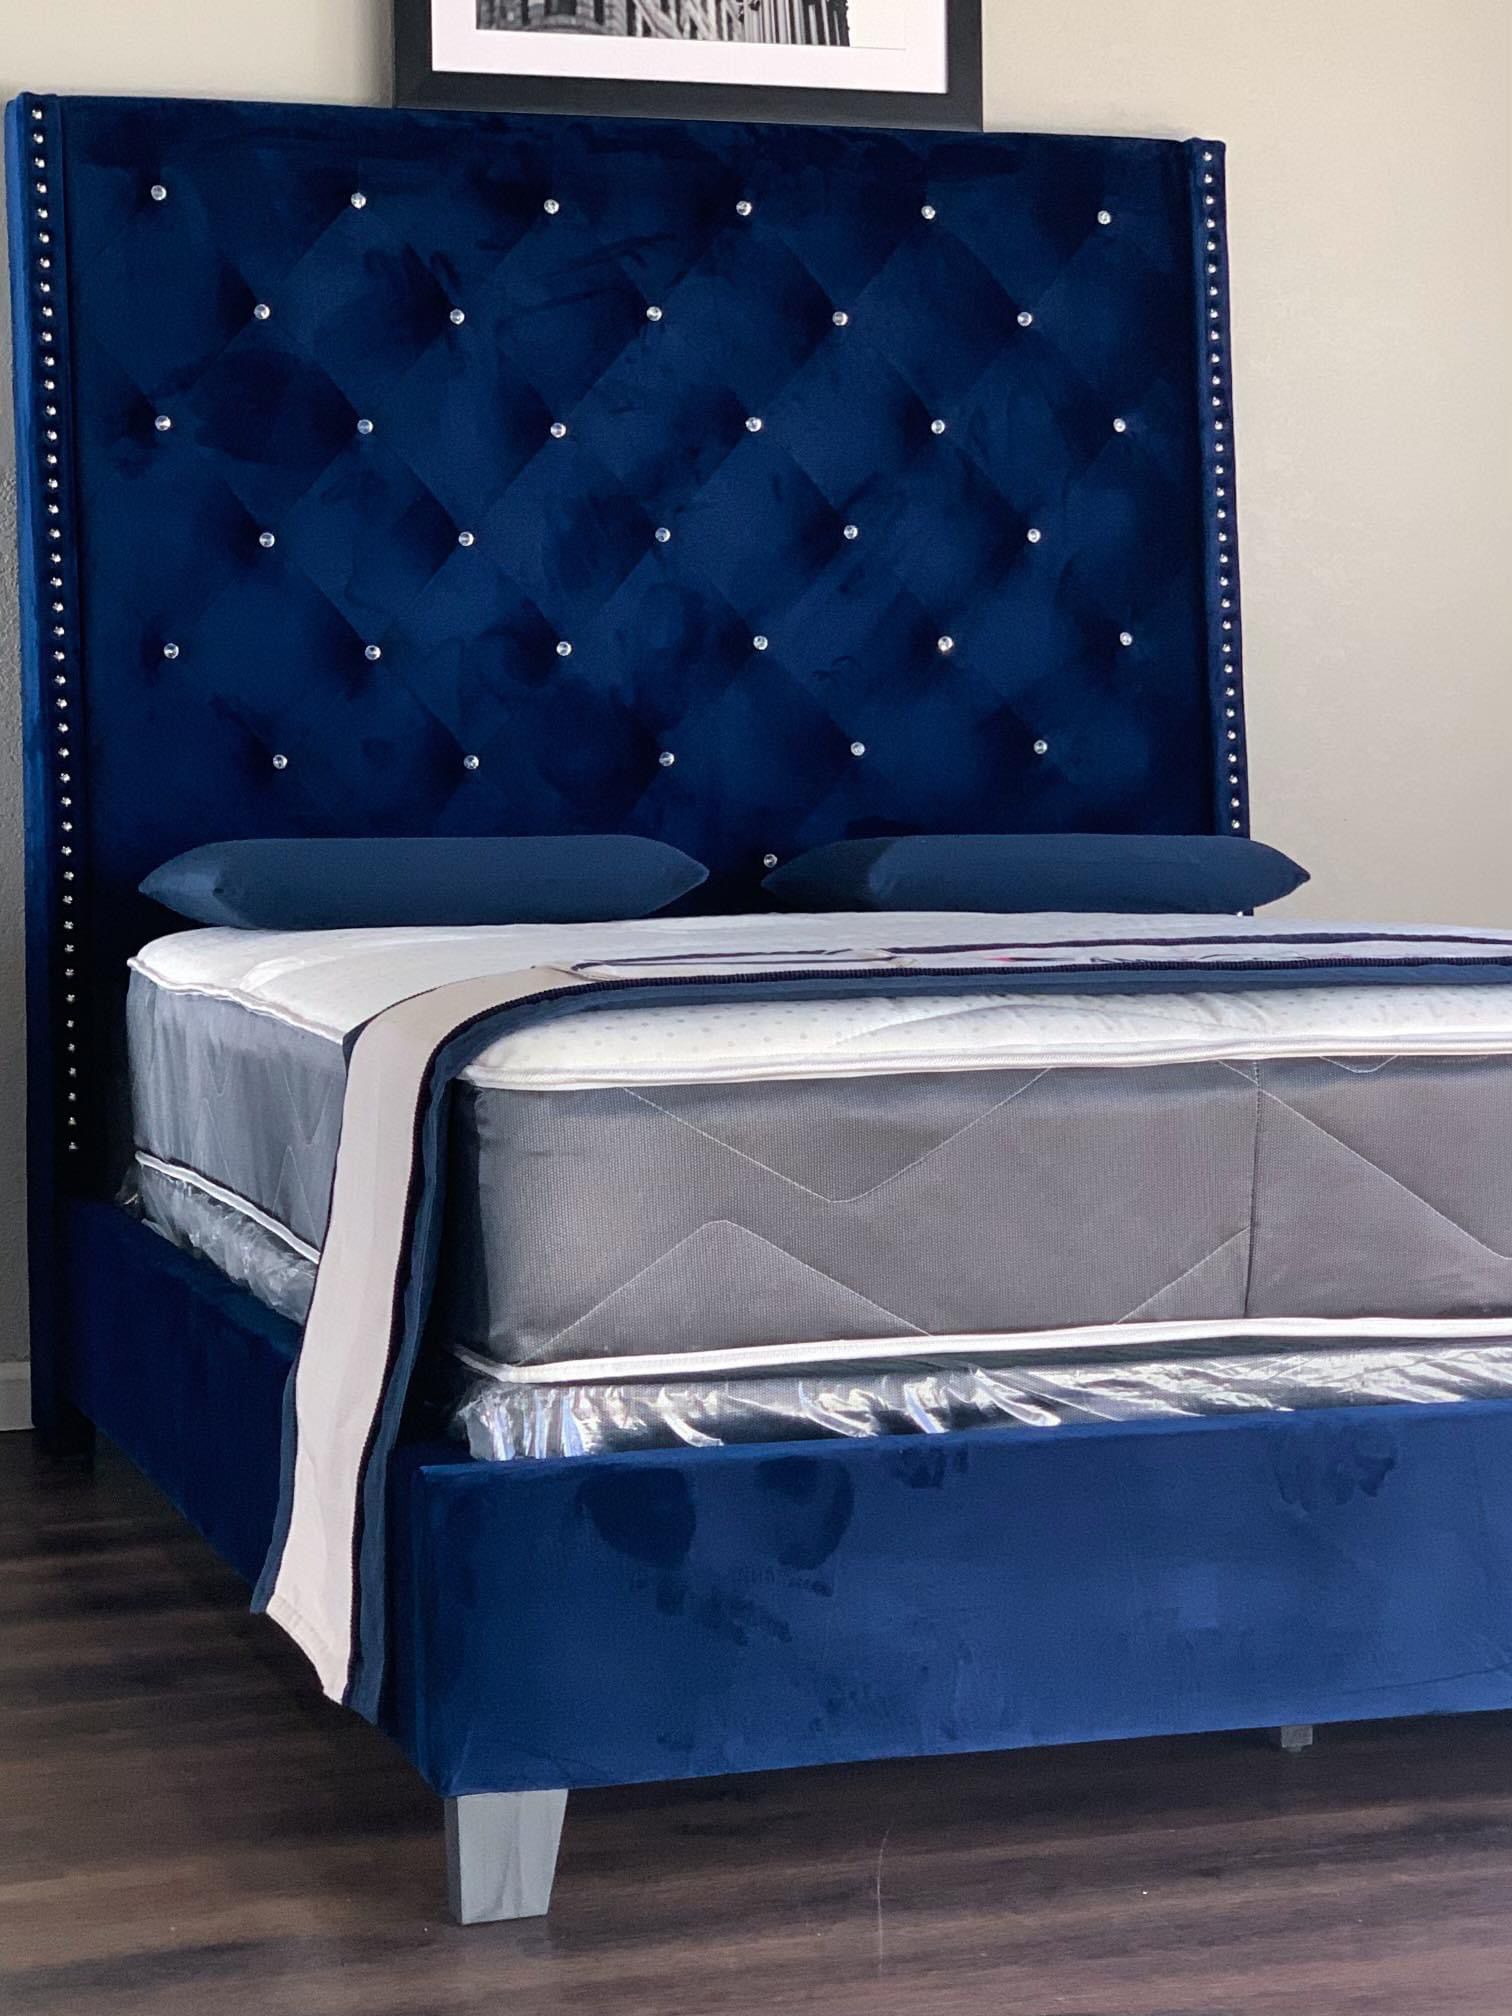 Brand New Queen Size 6foot Tall Blue Velvet Bed Frame With New Mattress & Box Spring